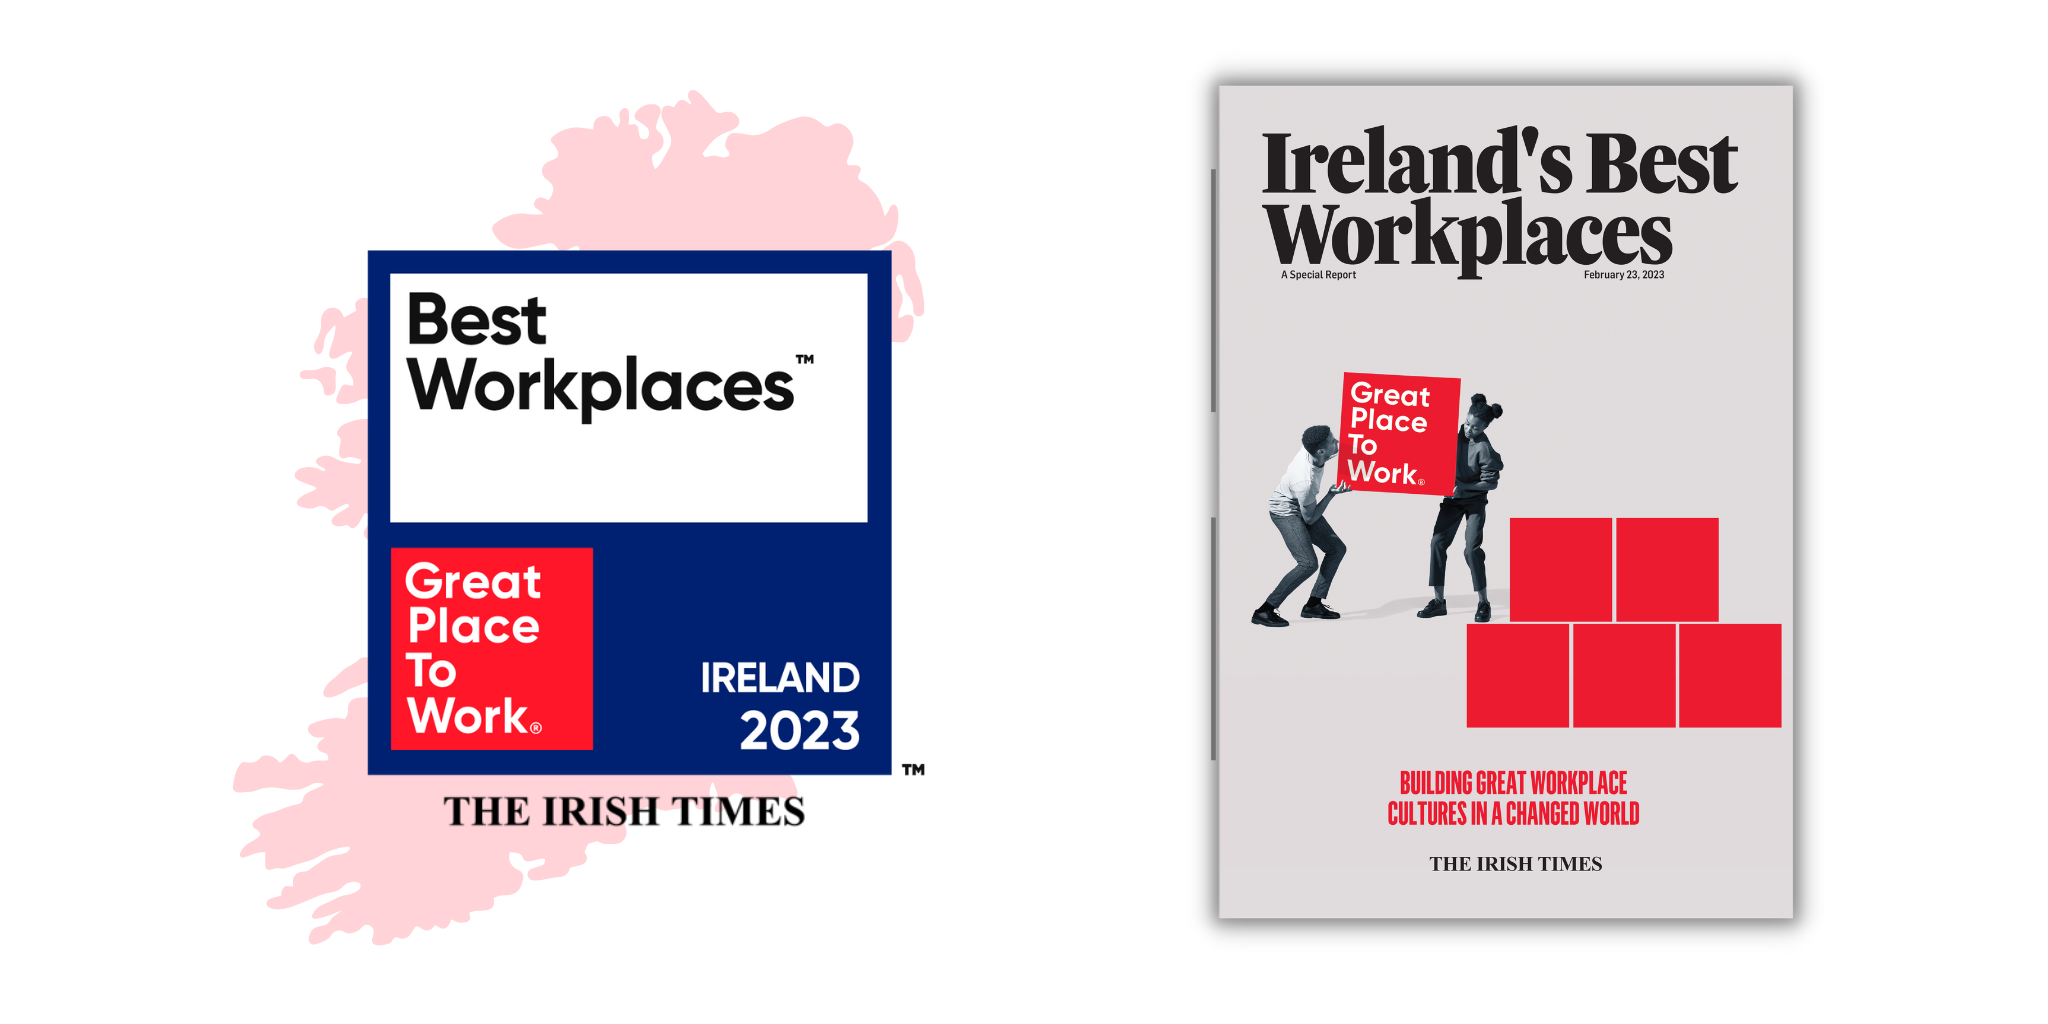 Ireland's Best Workplaces™ 2023 are revealed!